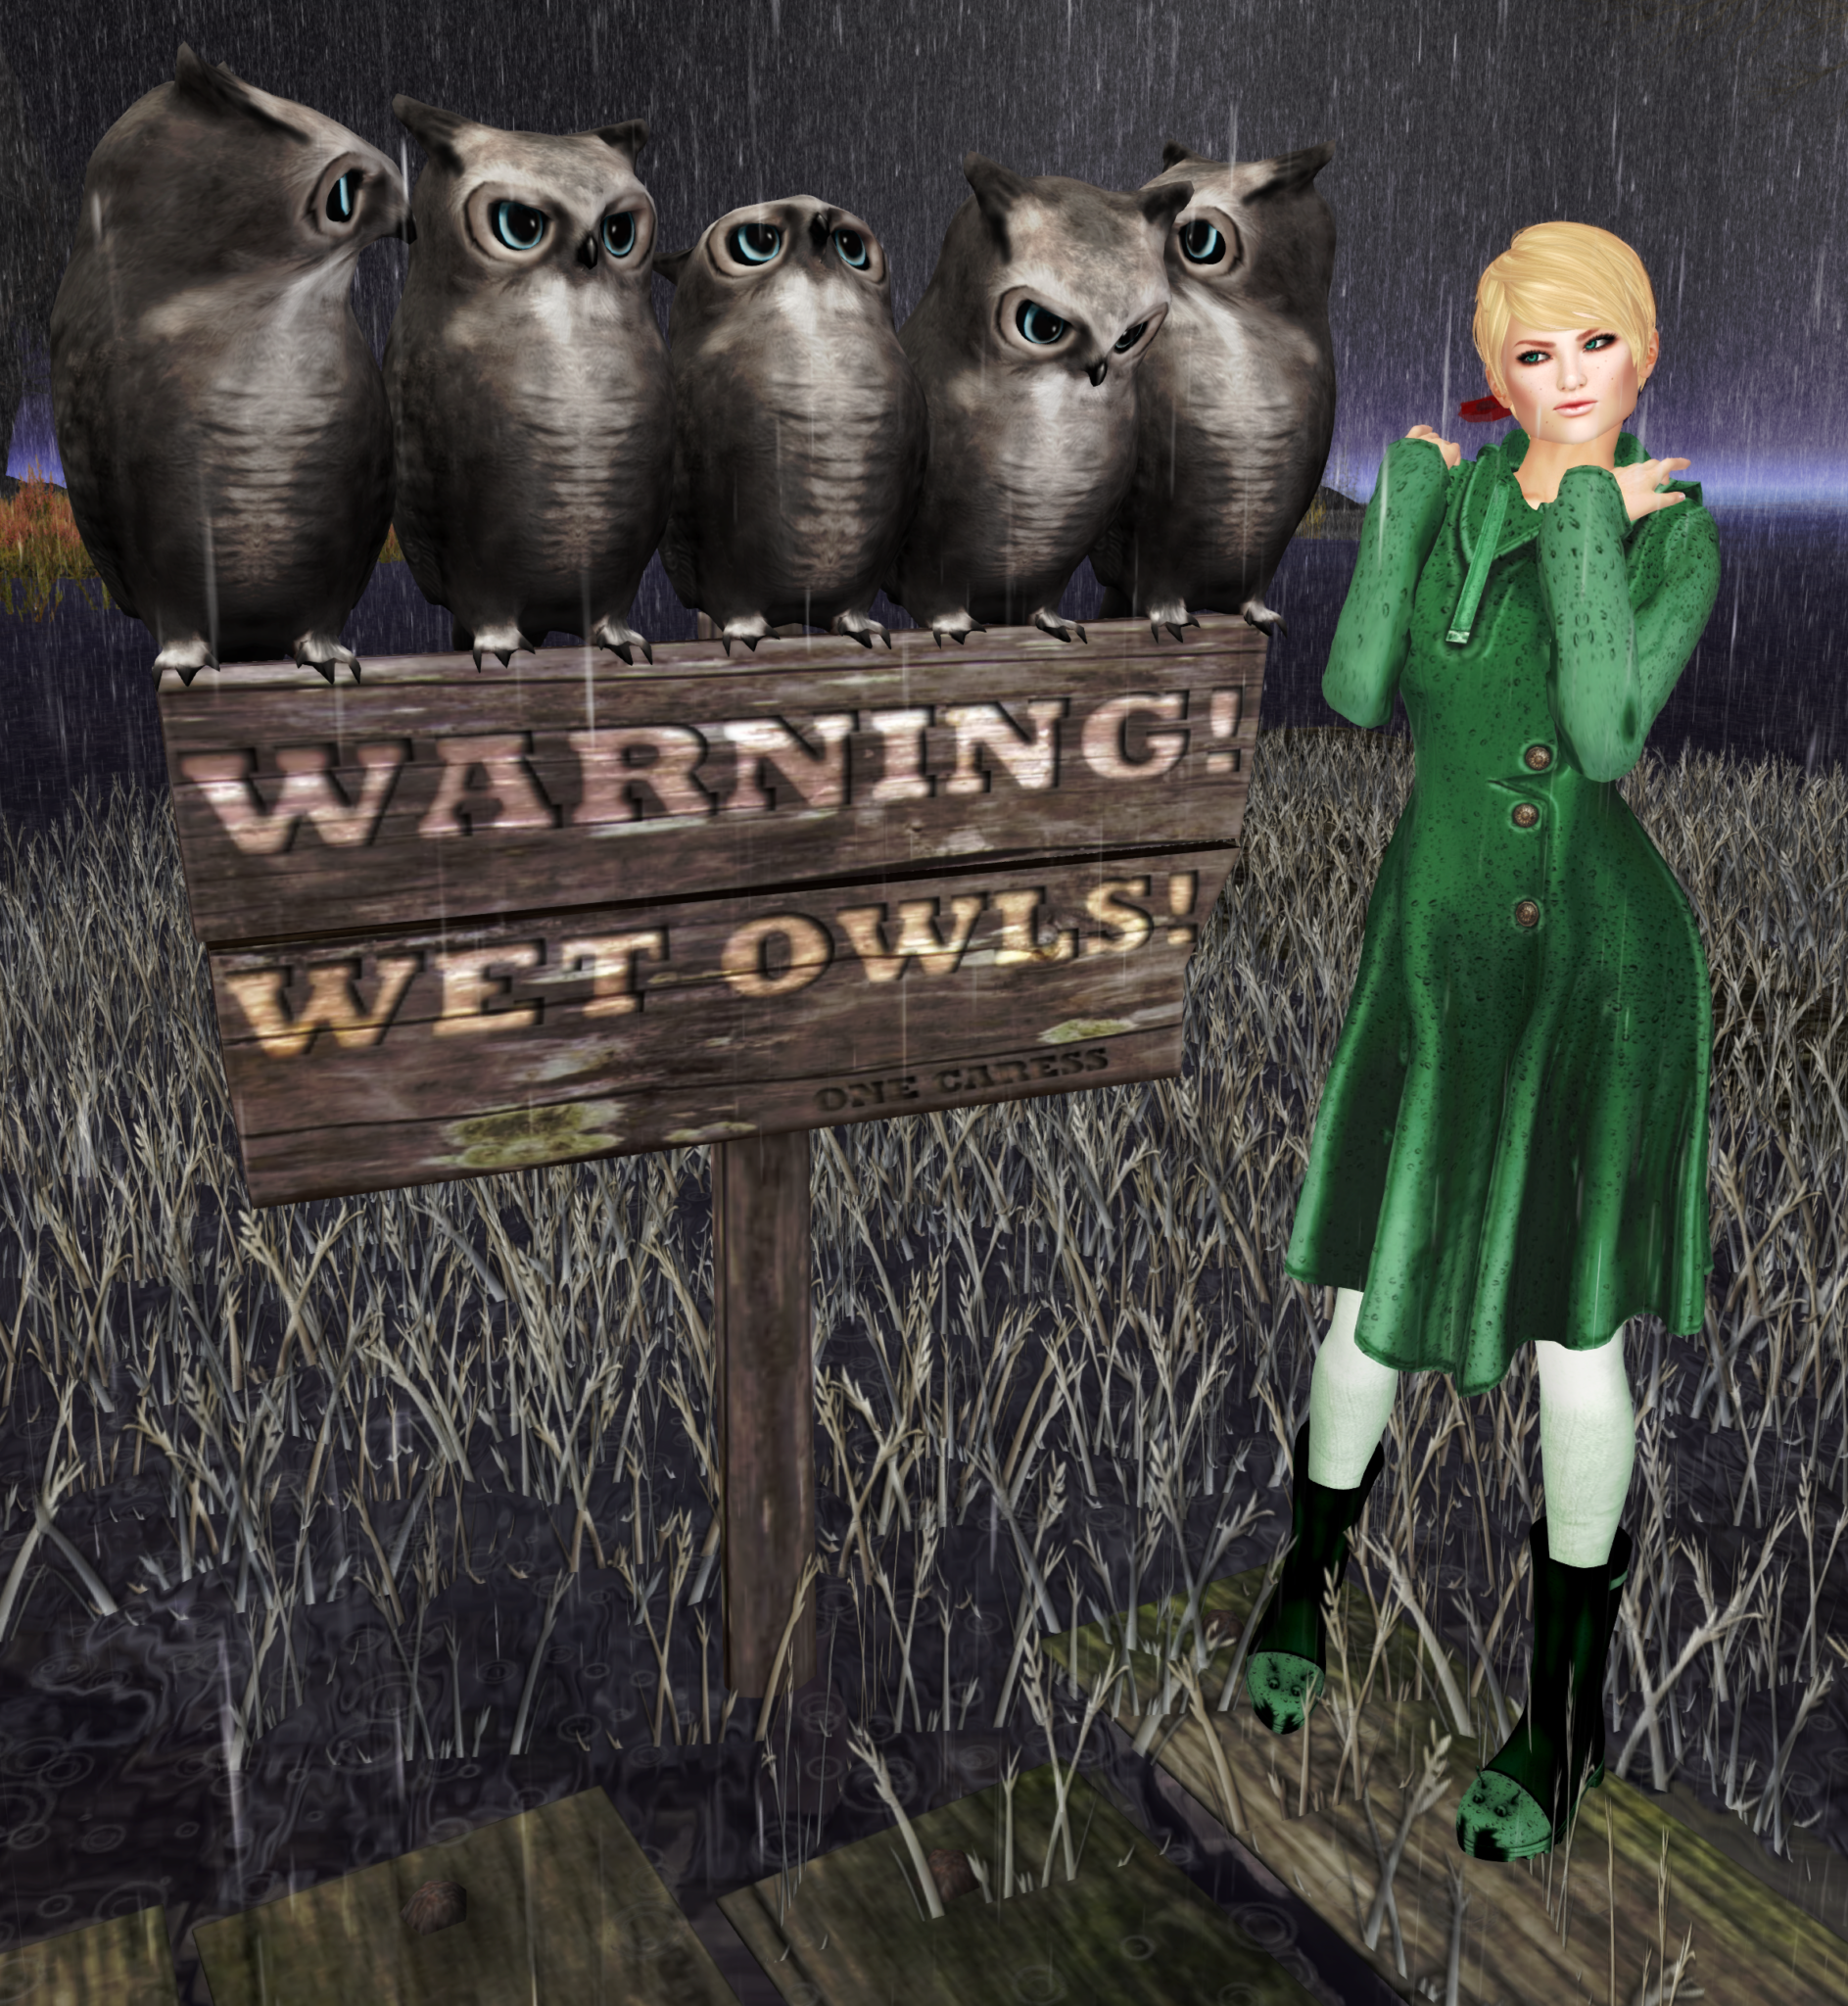 A female Second Life avatar wears a green raincoat and green boots. She's standing near some cute wet owls.